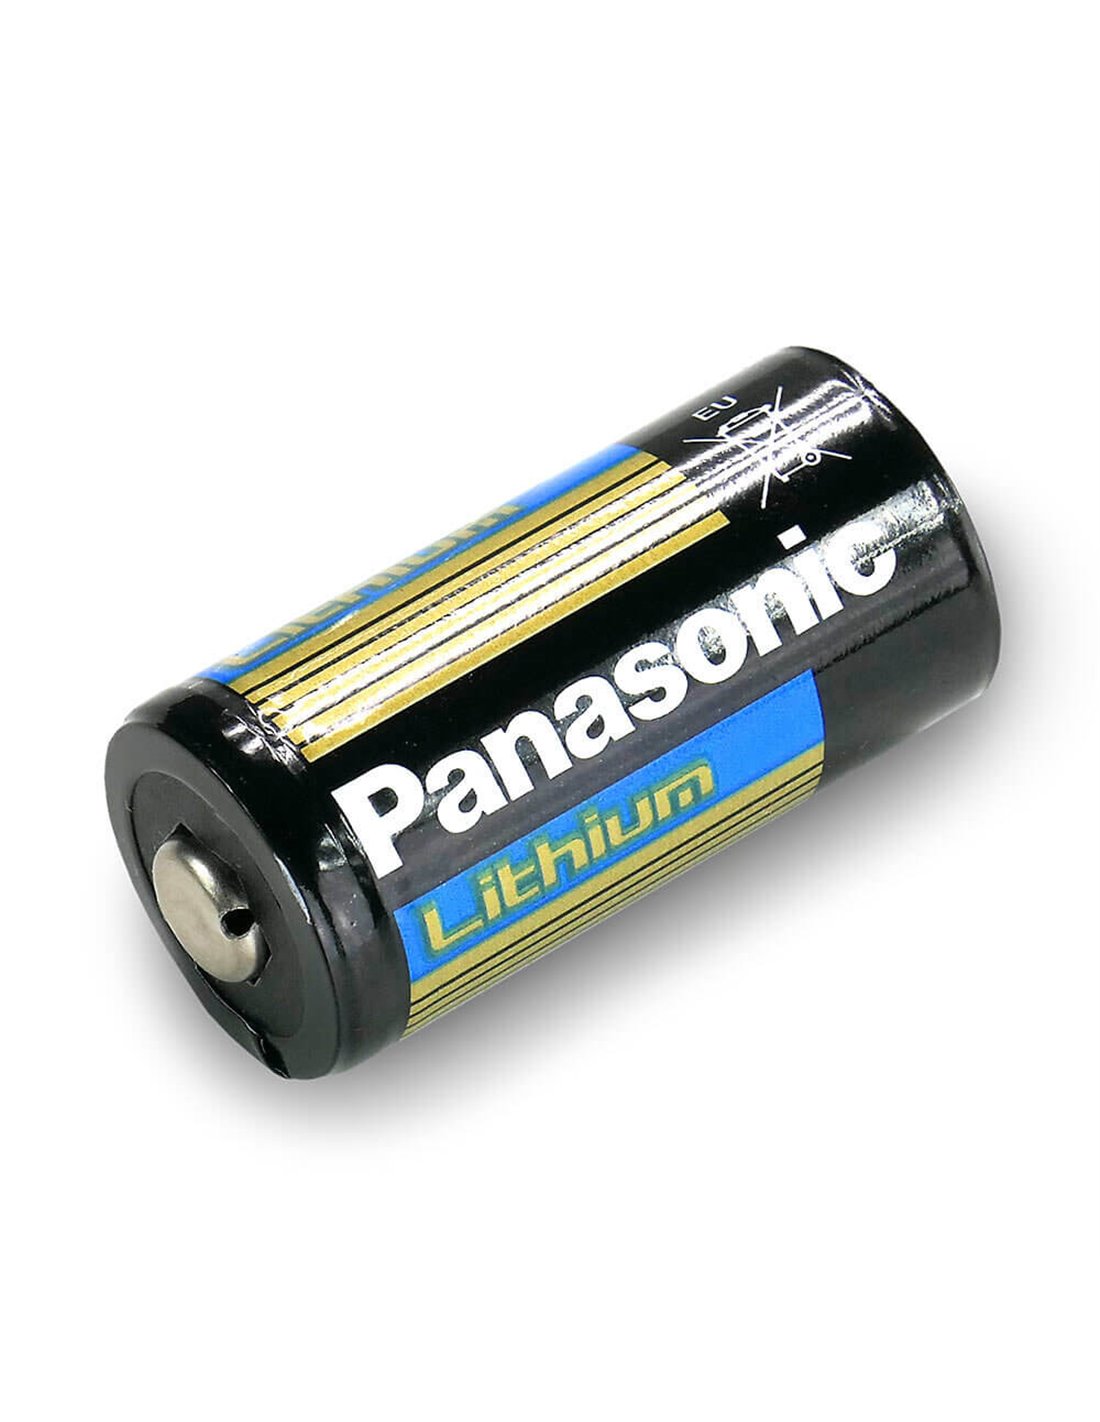 Panasonic 3V CR123A 1400Mah Lithium Battery replaces CR17345, CR123A - Non Rechargeable